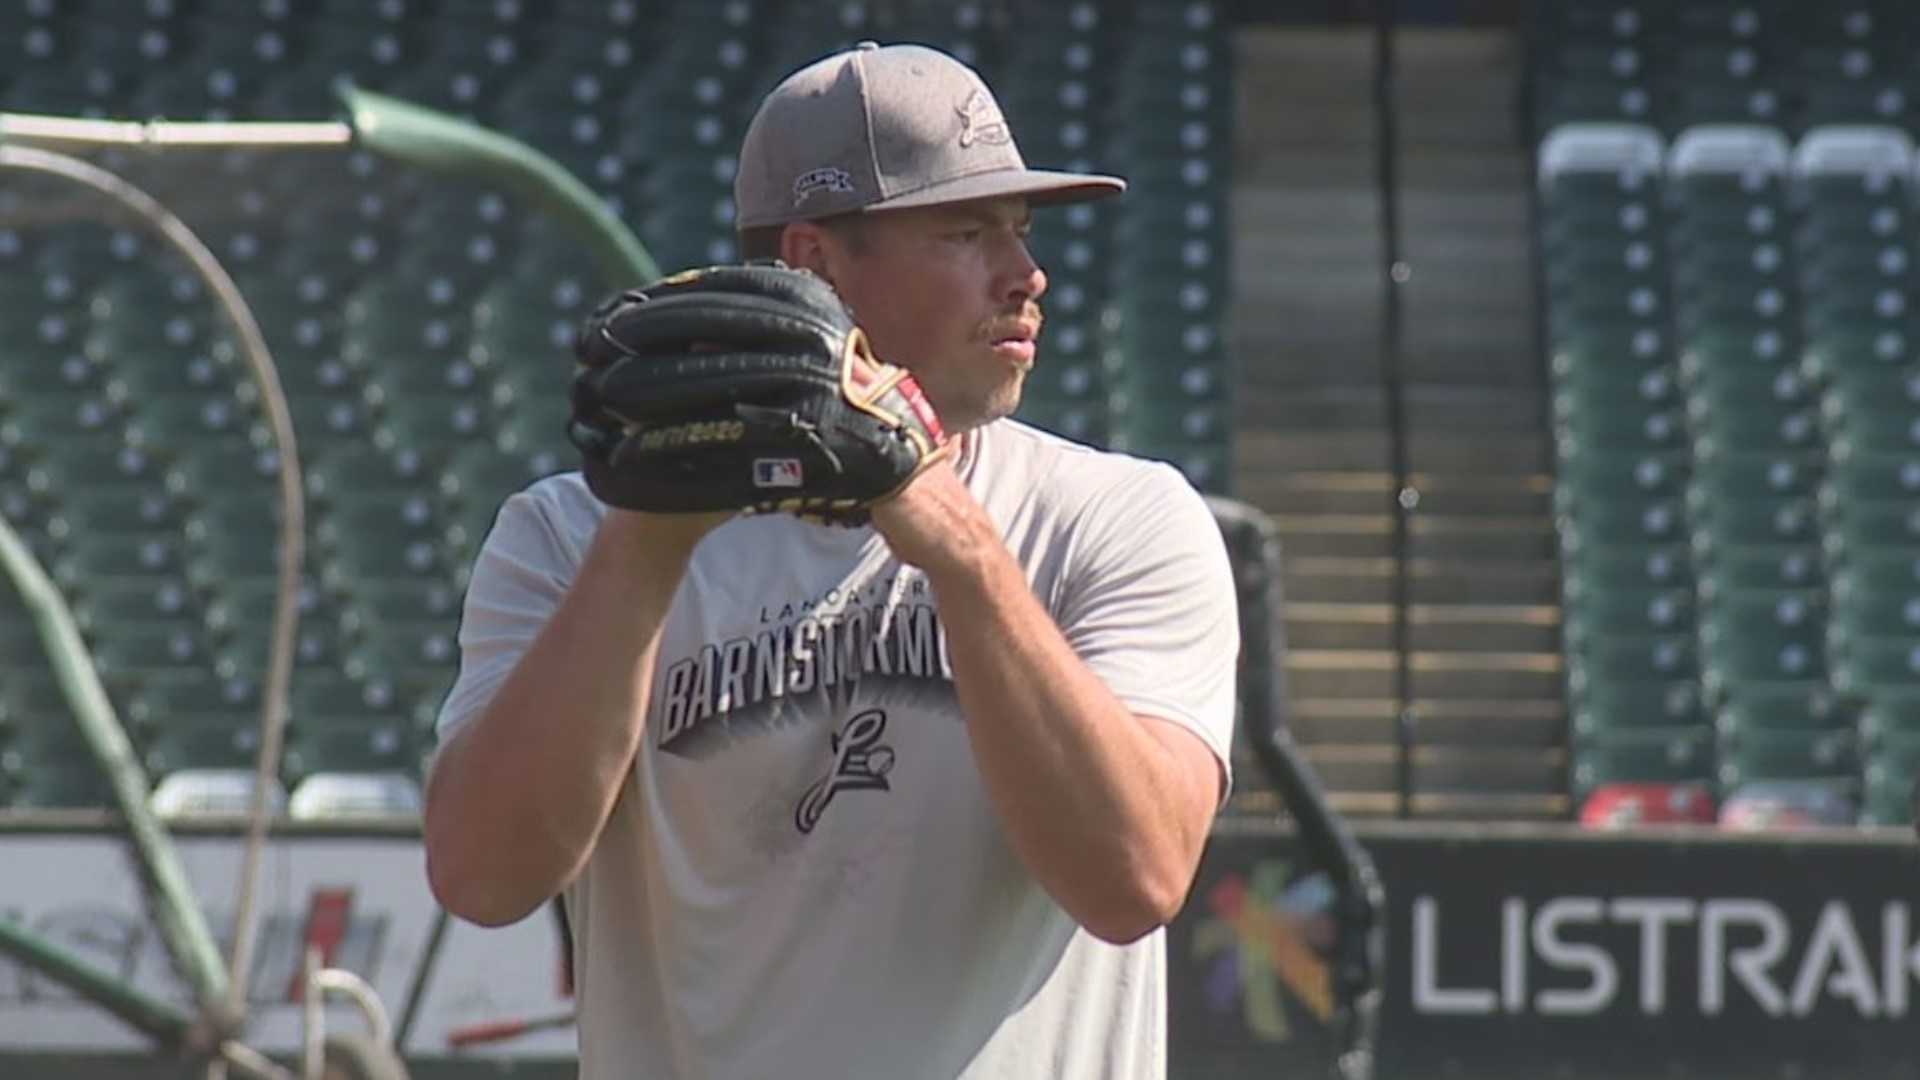 Barnstormers closing pitcher Andrew Lee has made Central Pa. his second home, with stints with the Harrisburg Senators and now the Lancaster Barnstormers.